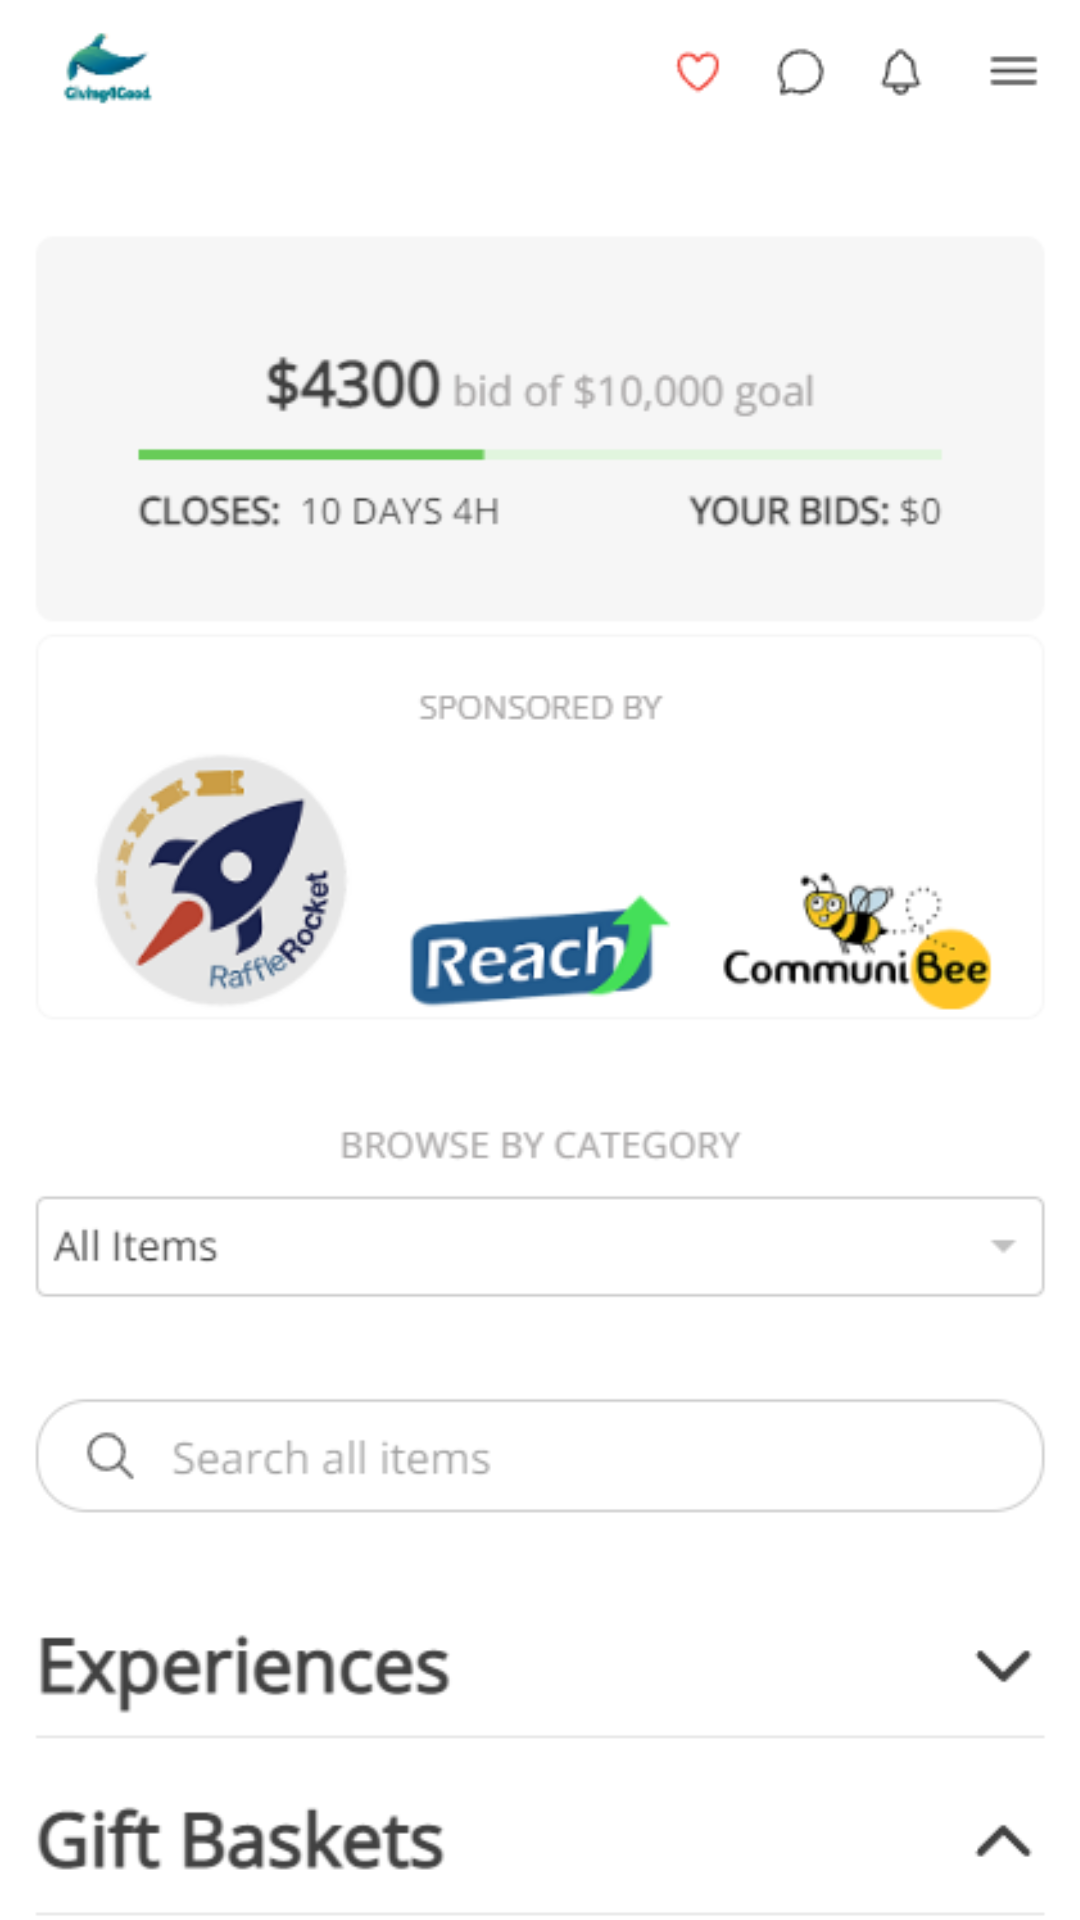 Optional goal tracker, sponsor carousel and categories on the item browse screen of an auction.  Search functionality helps users find items fast, favoriting items keeps them in your menu and chat functionality allows guests to communicate with admins.